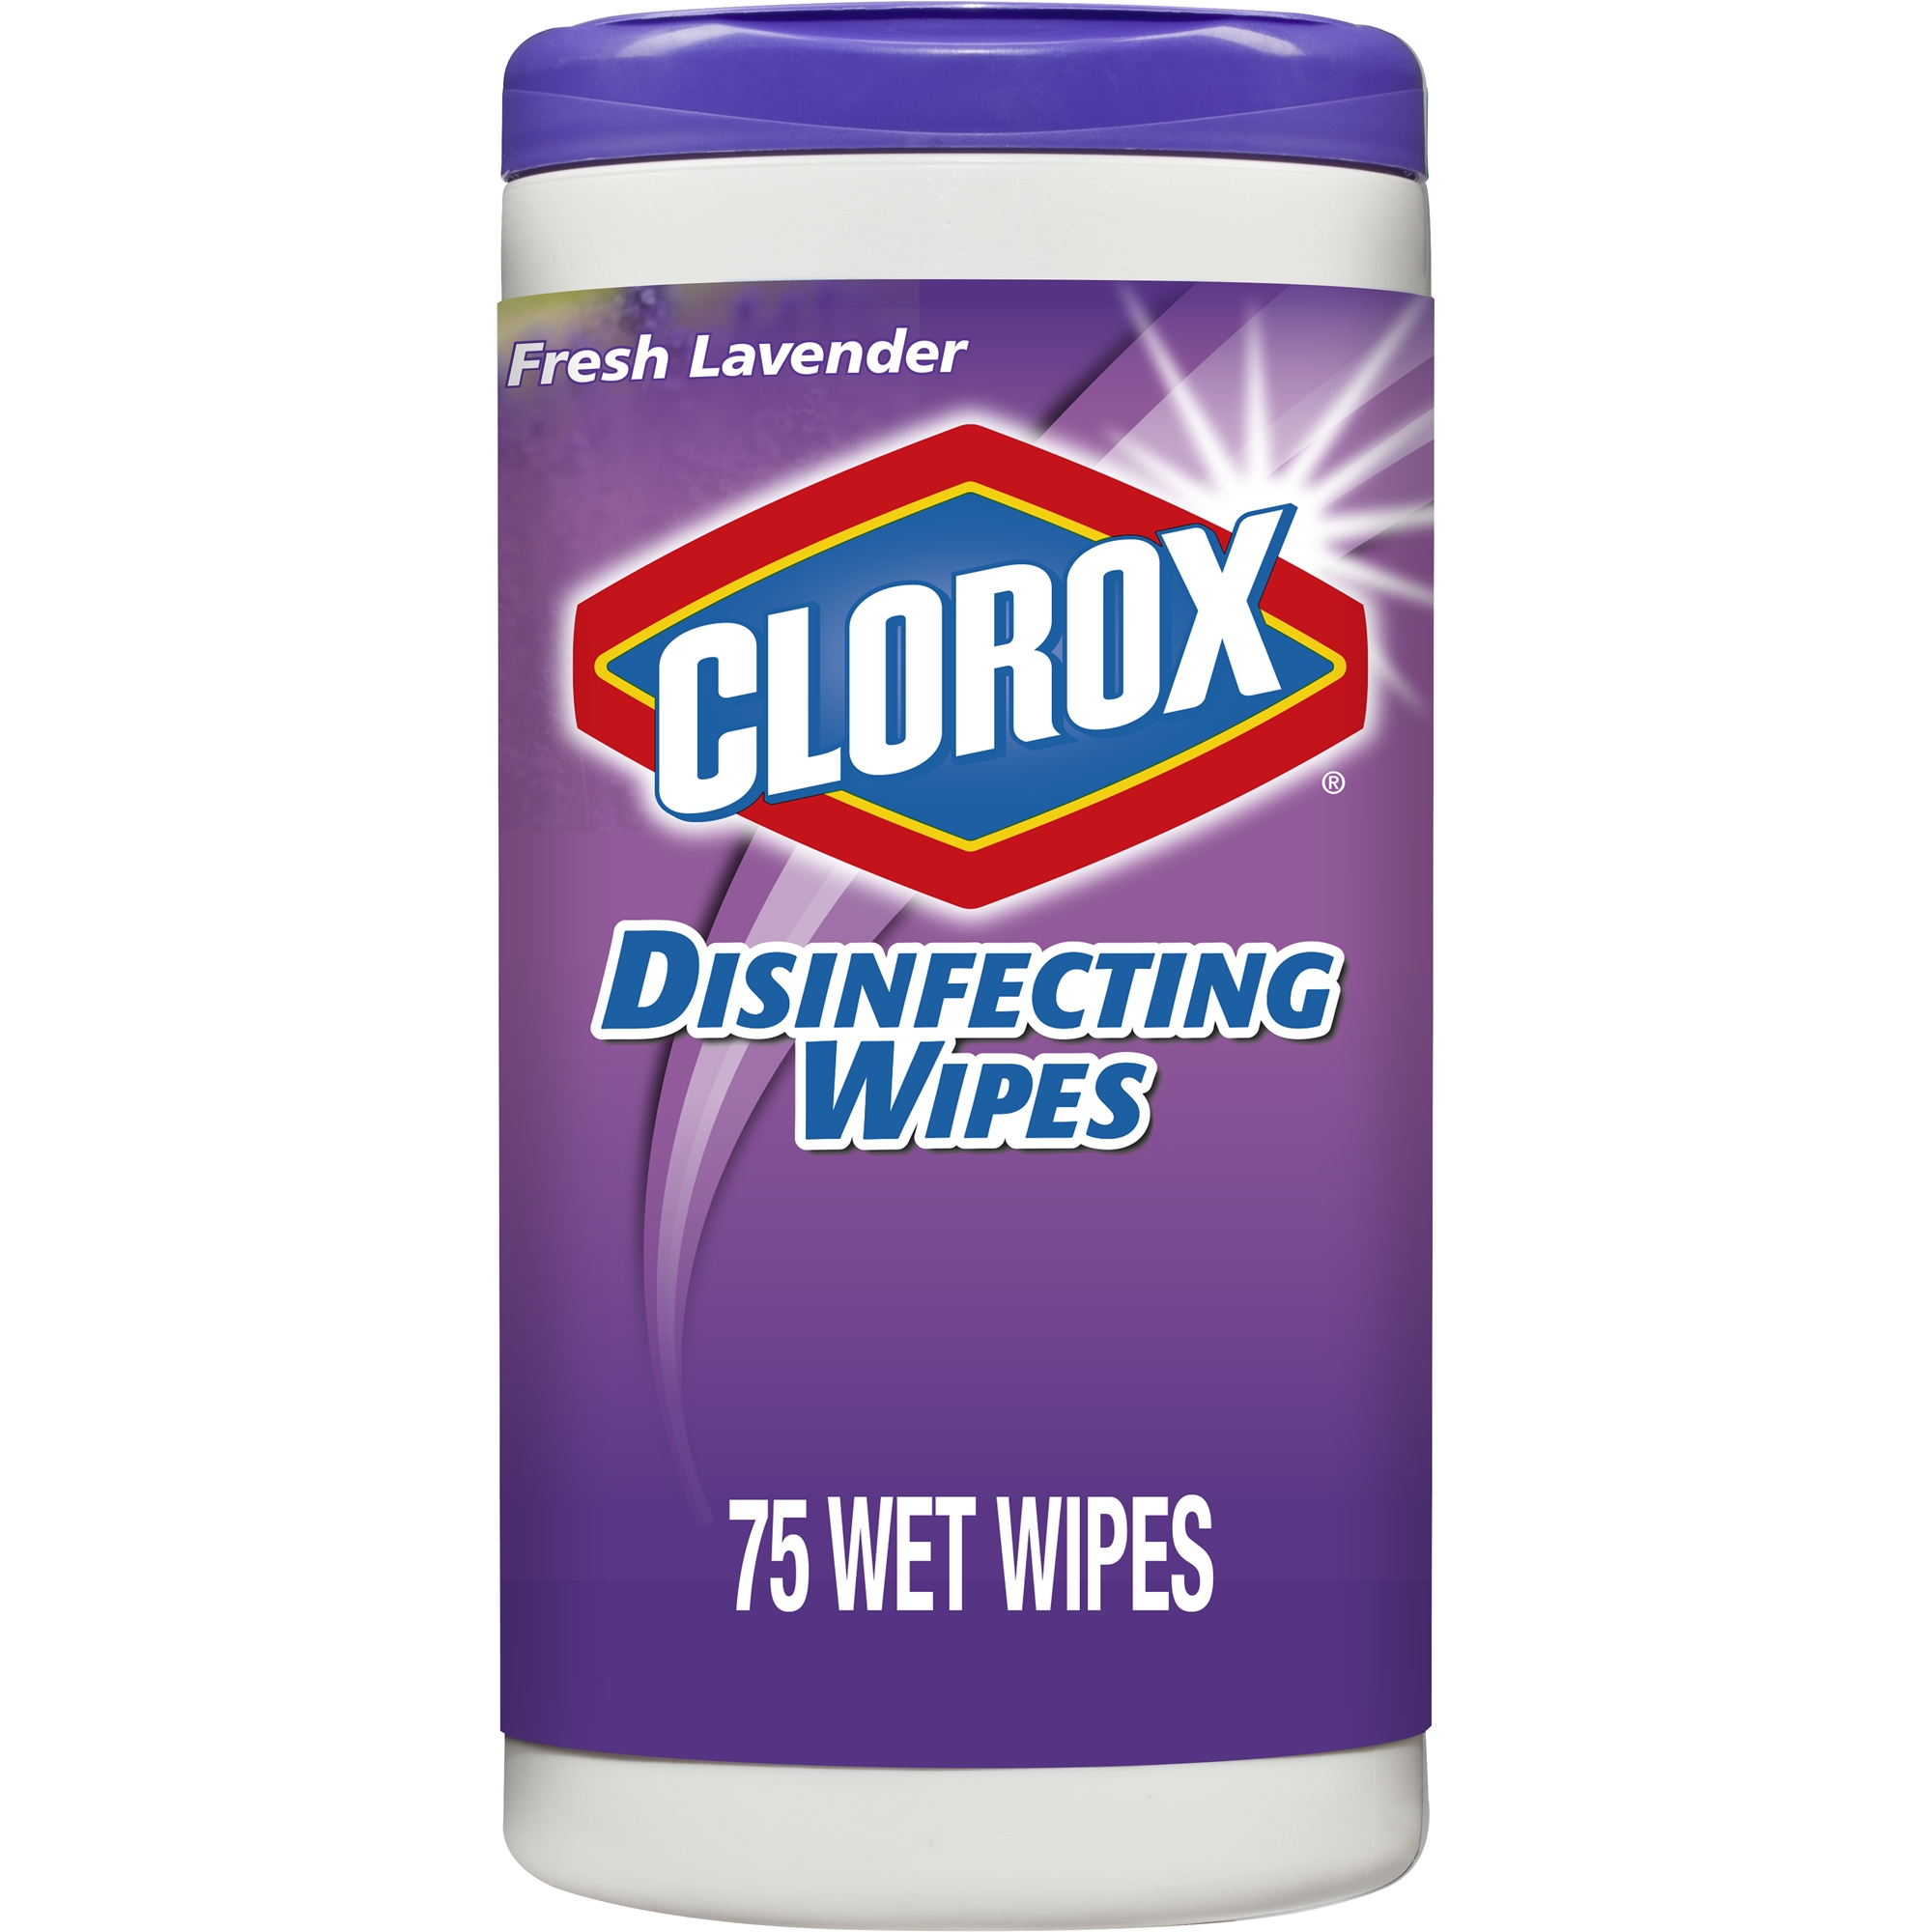 Clorox Disinfecting Wipes, Bleach Free Cleaning Wipes - Fresh Lavender, 75 ct - image 1 of 8